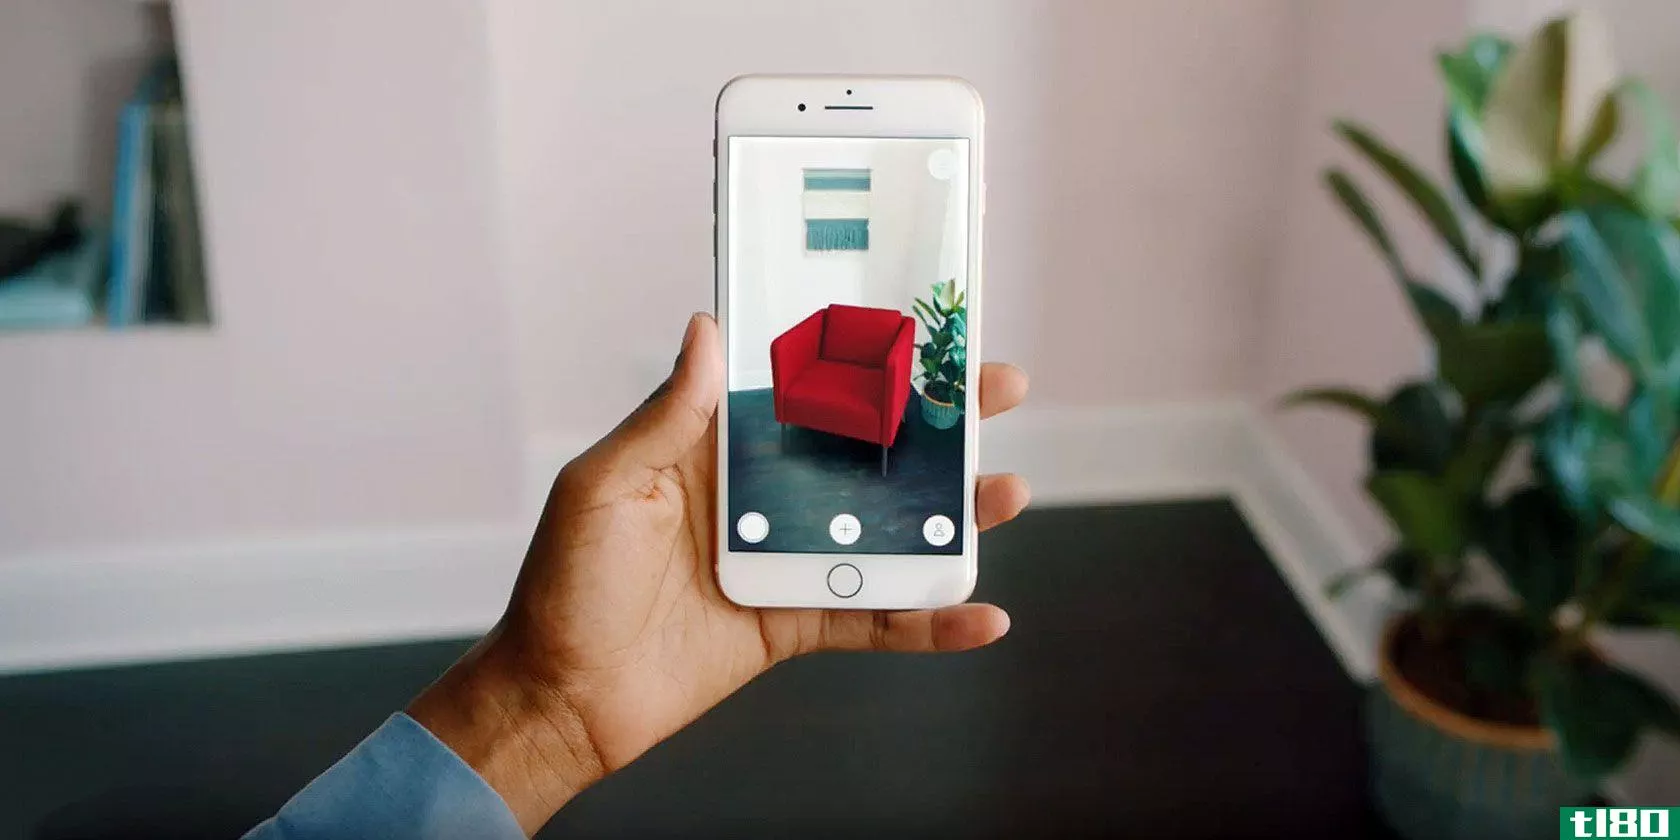 An iPhone showing a furniture app in augmented reality